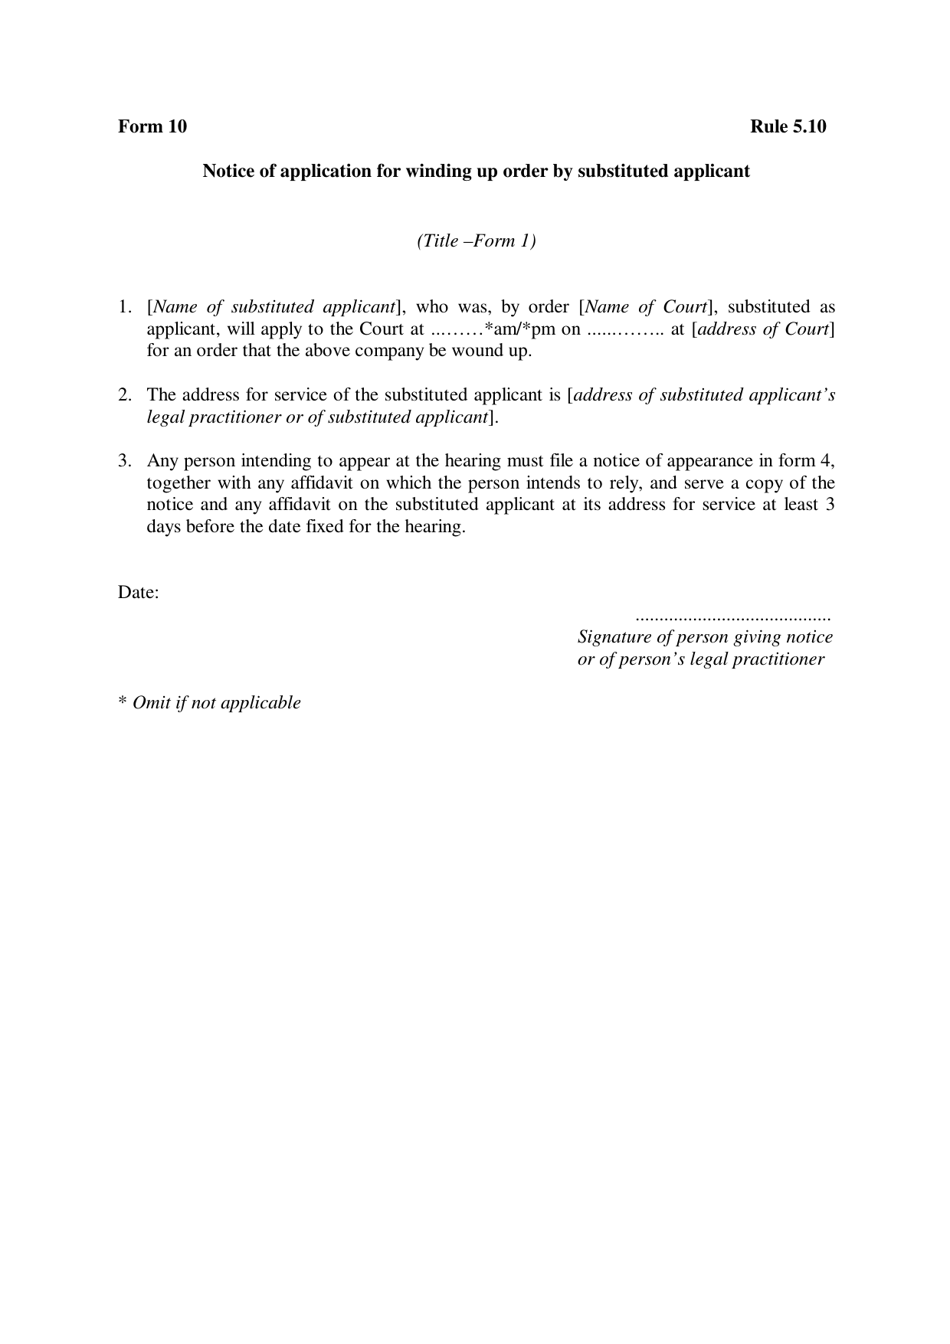 Form 10 Notice of Application for Winding up Order by Substituted Applicant - Queensland, Australia, Page 1